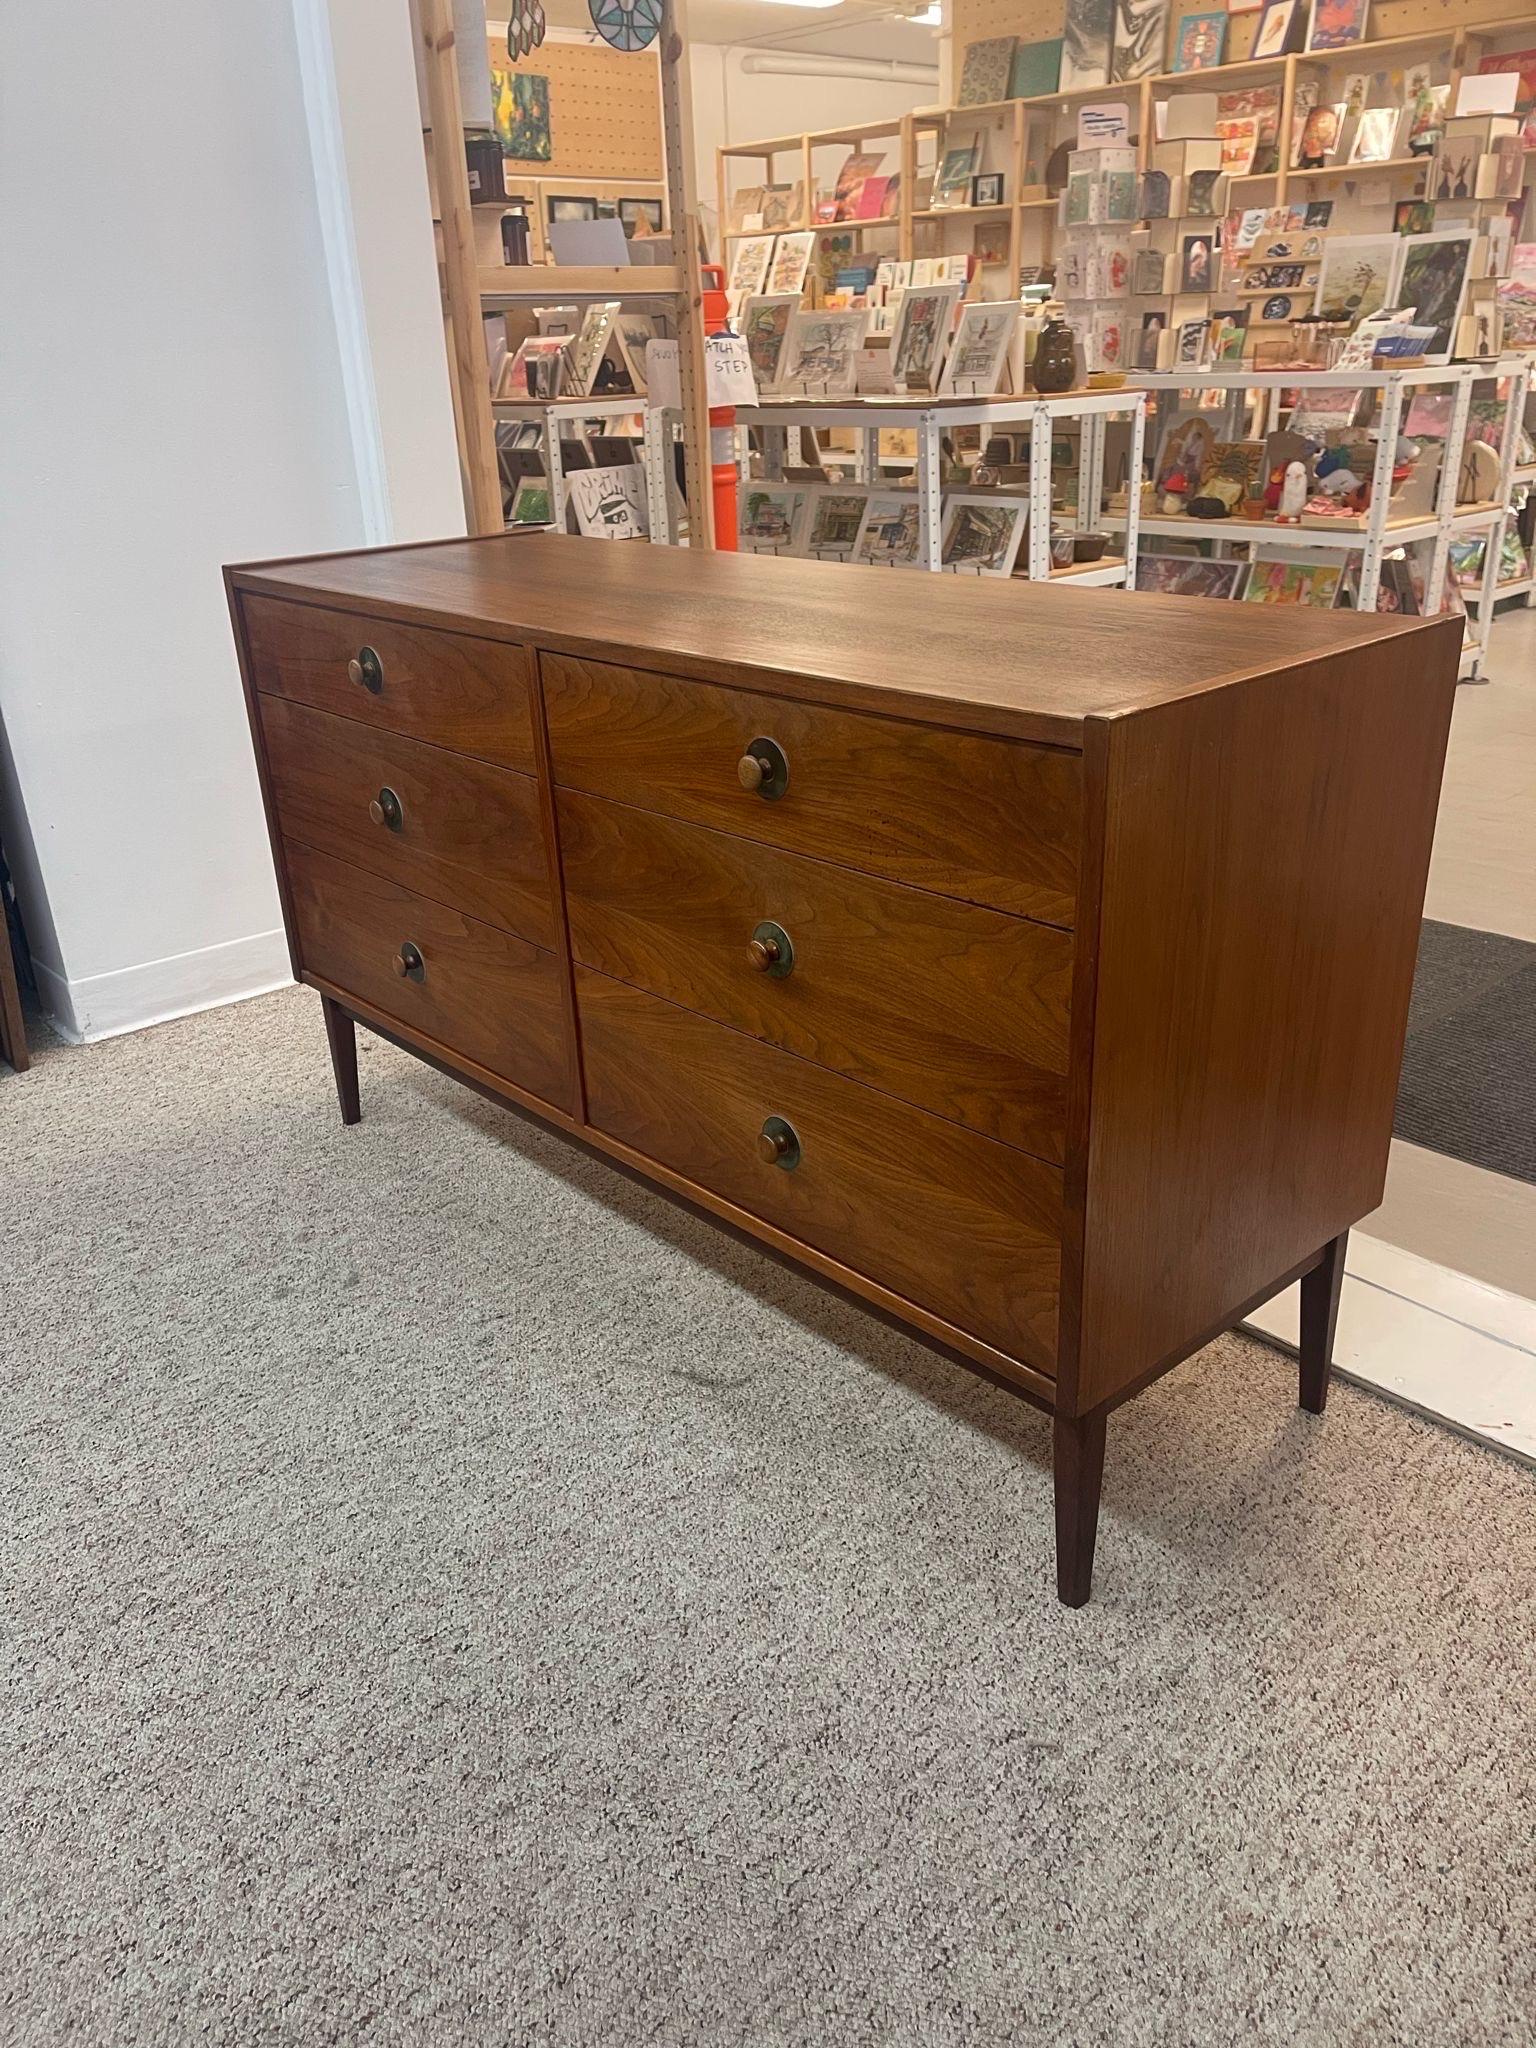 This Dresser Features Six Dovetailed Drawers with Original Turned Wood Handles. Tapered Legs, Walnut Toned Wood. Vintage Condition Consistent with Age as Pictured.

Dimensions. 52 W ; 18 D ; 30 H